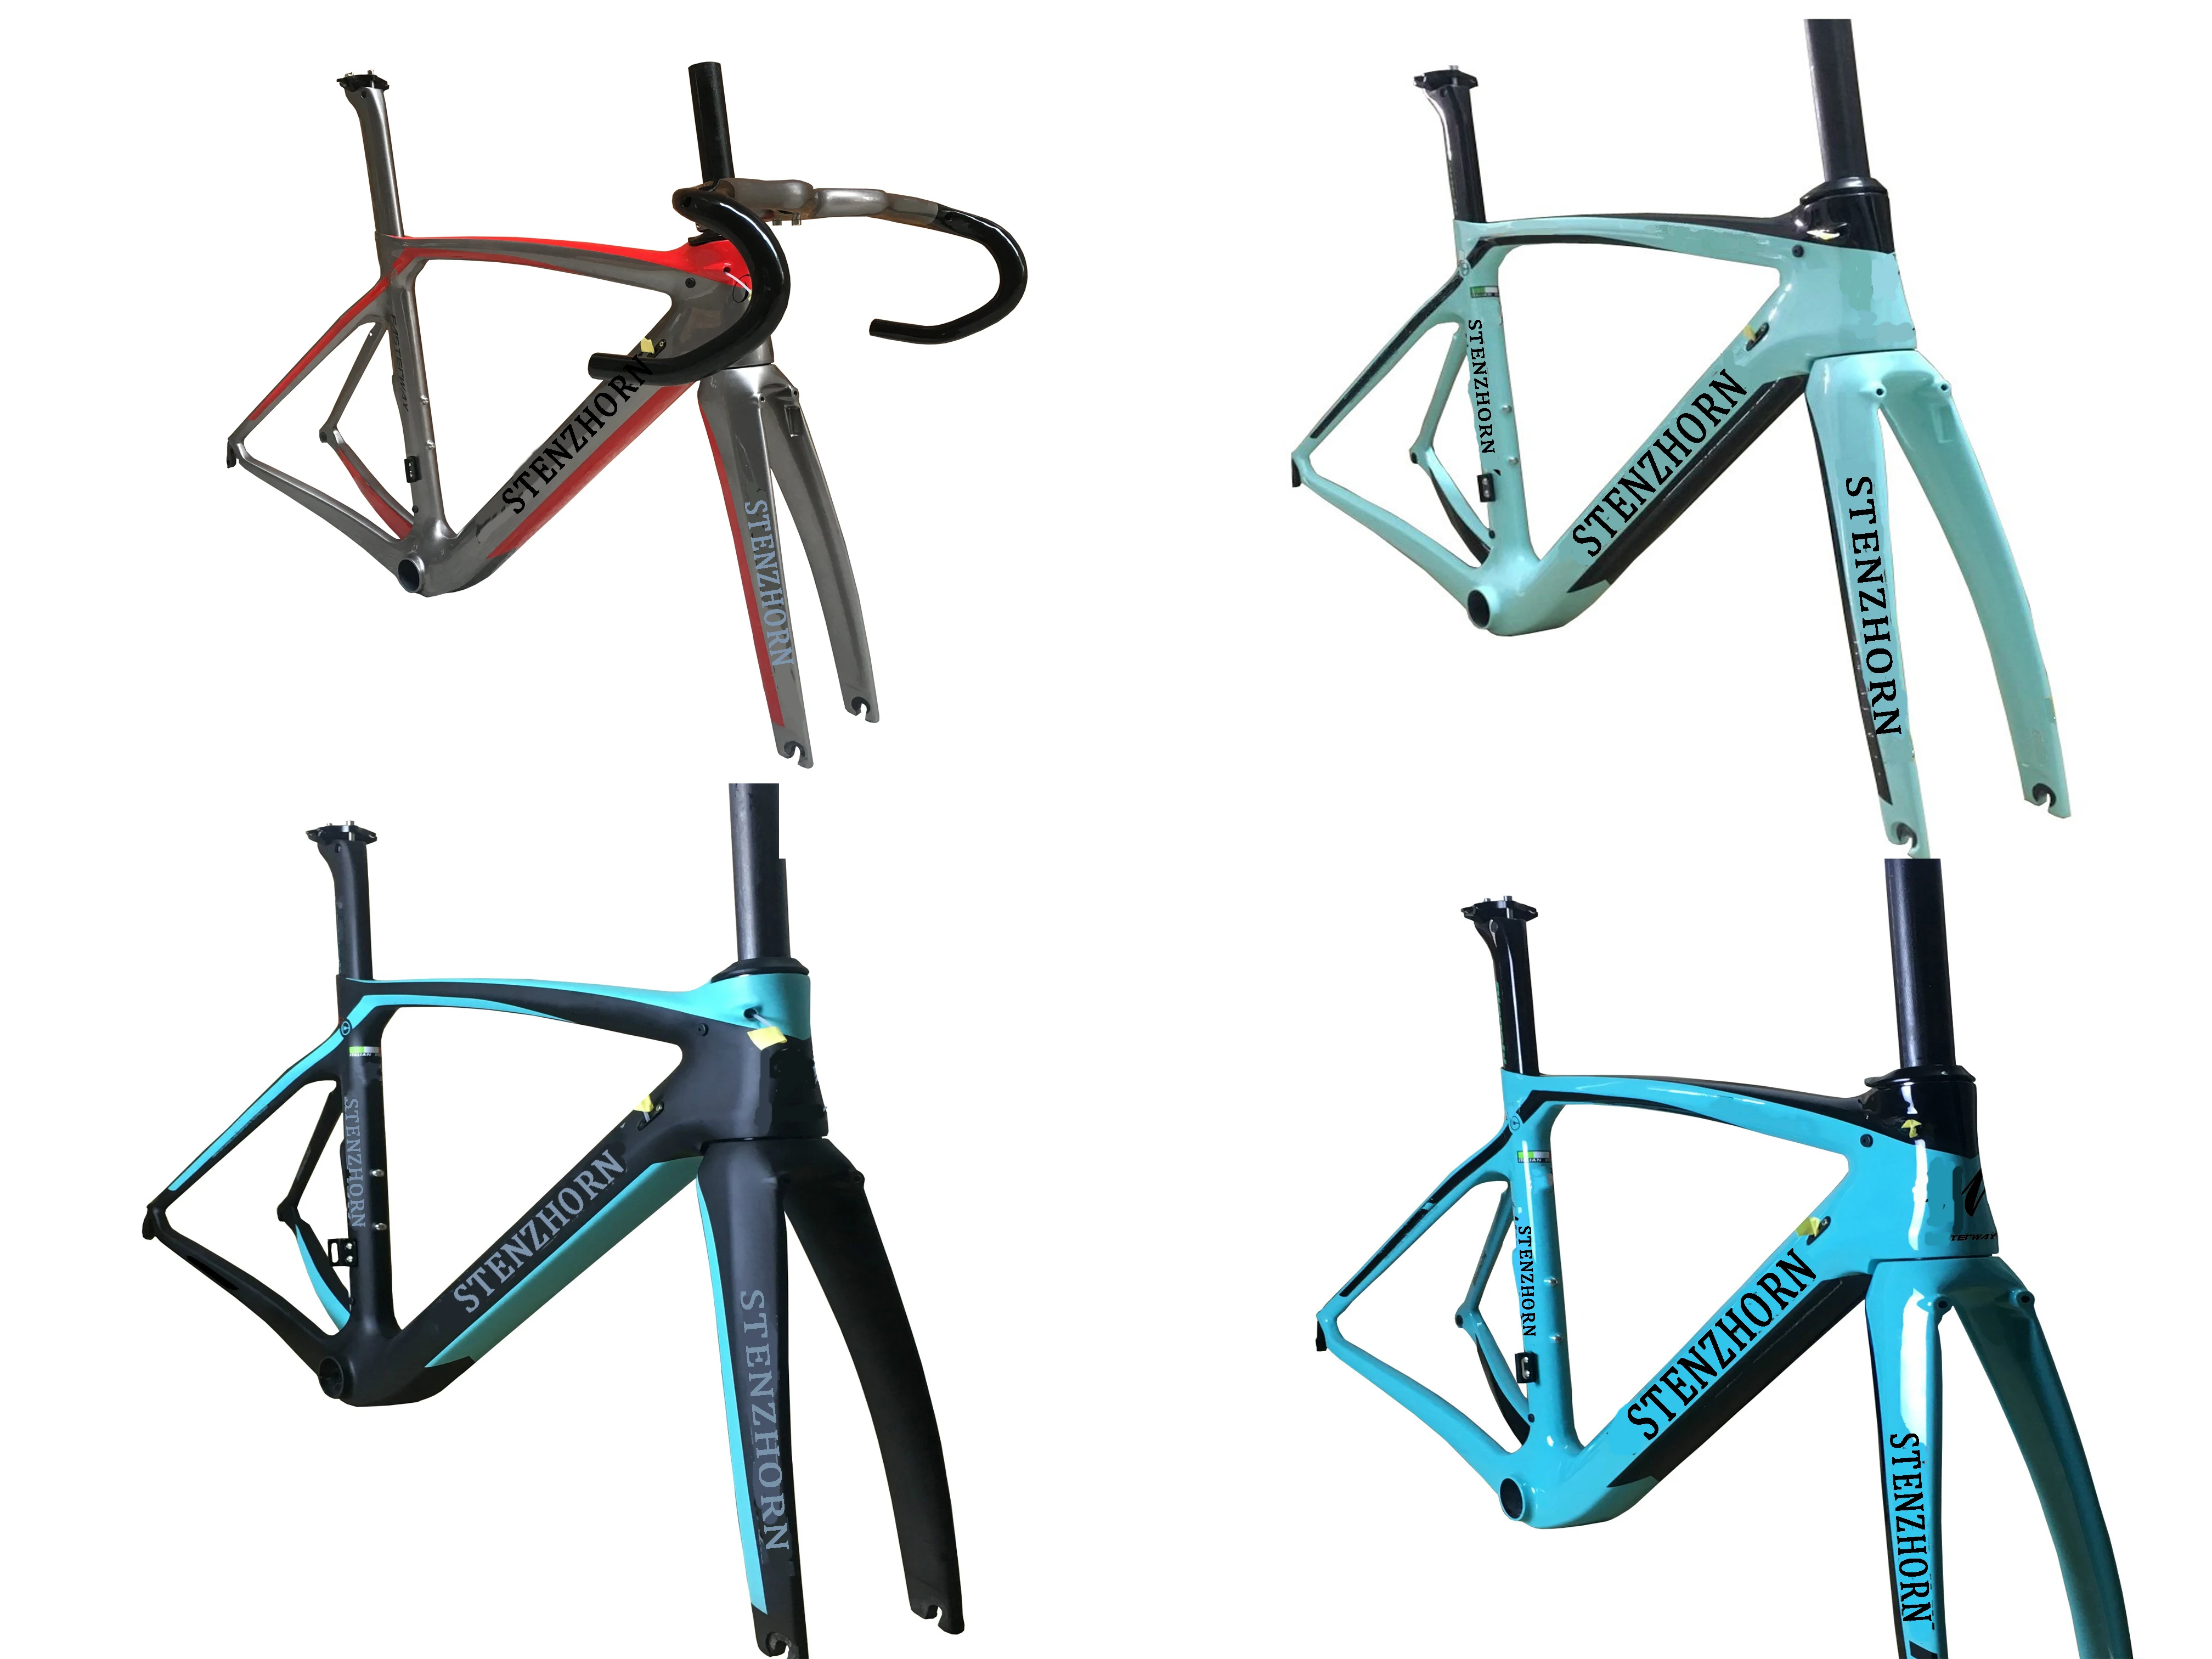 Top stenzhorn high quality XR4 newest arrival New Logo hot carbon Road bike Toray T1100 UD Frame: Frame+Seatpost+Fork+Clamp+Headset 0